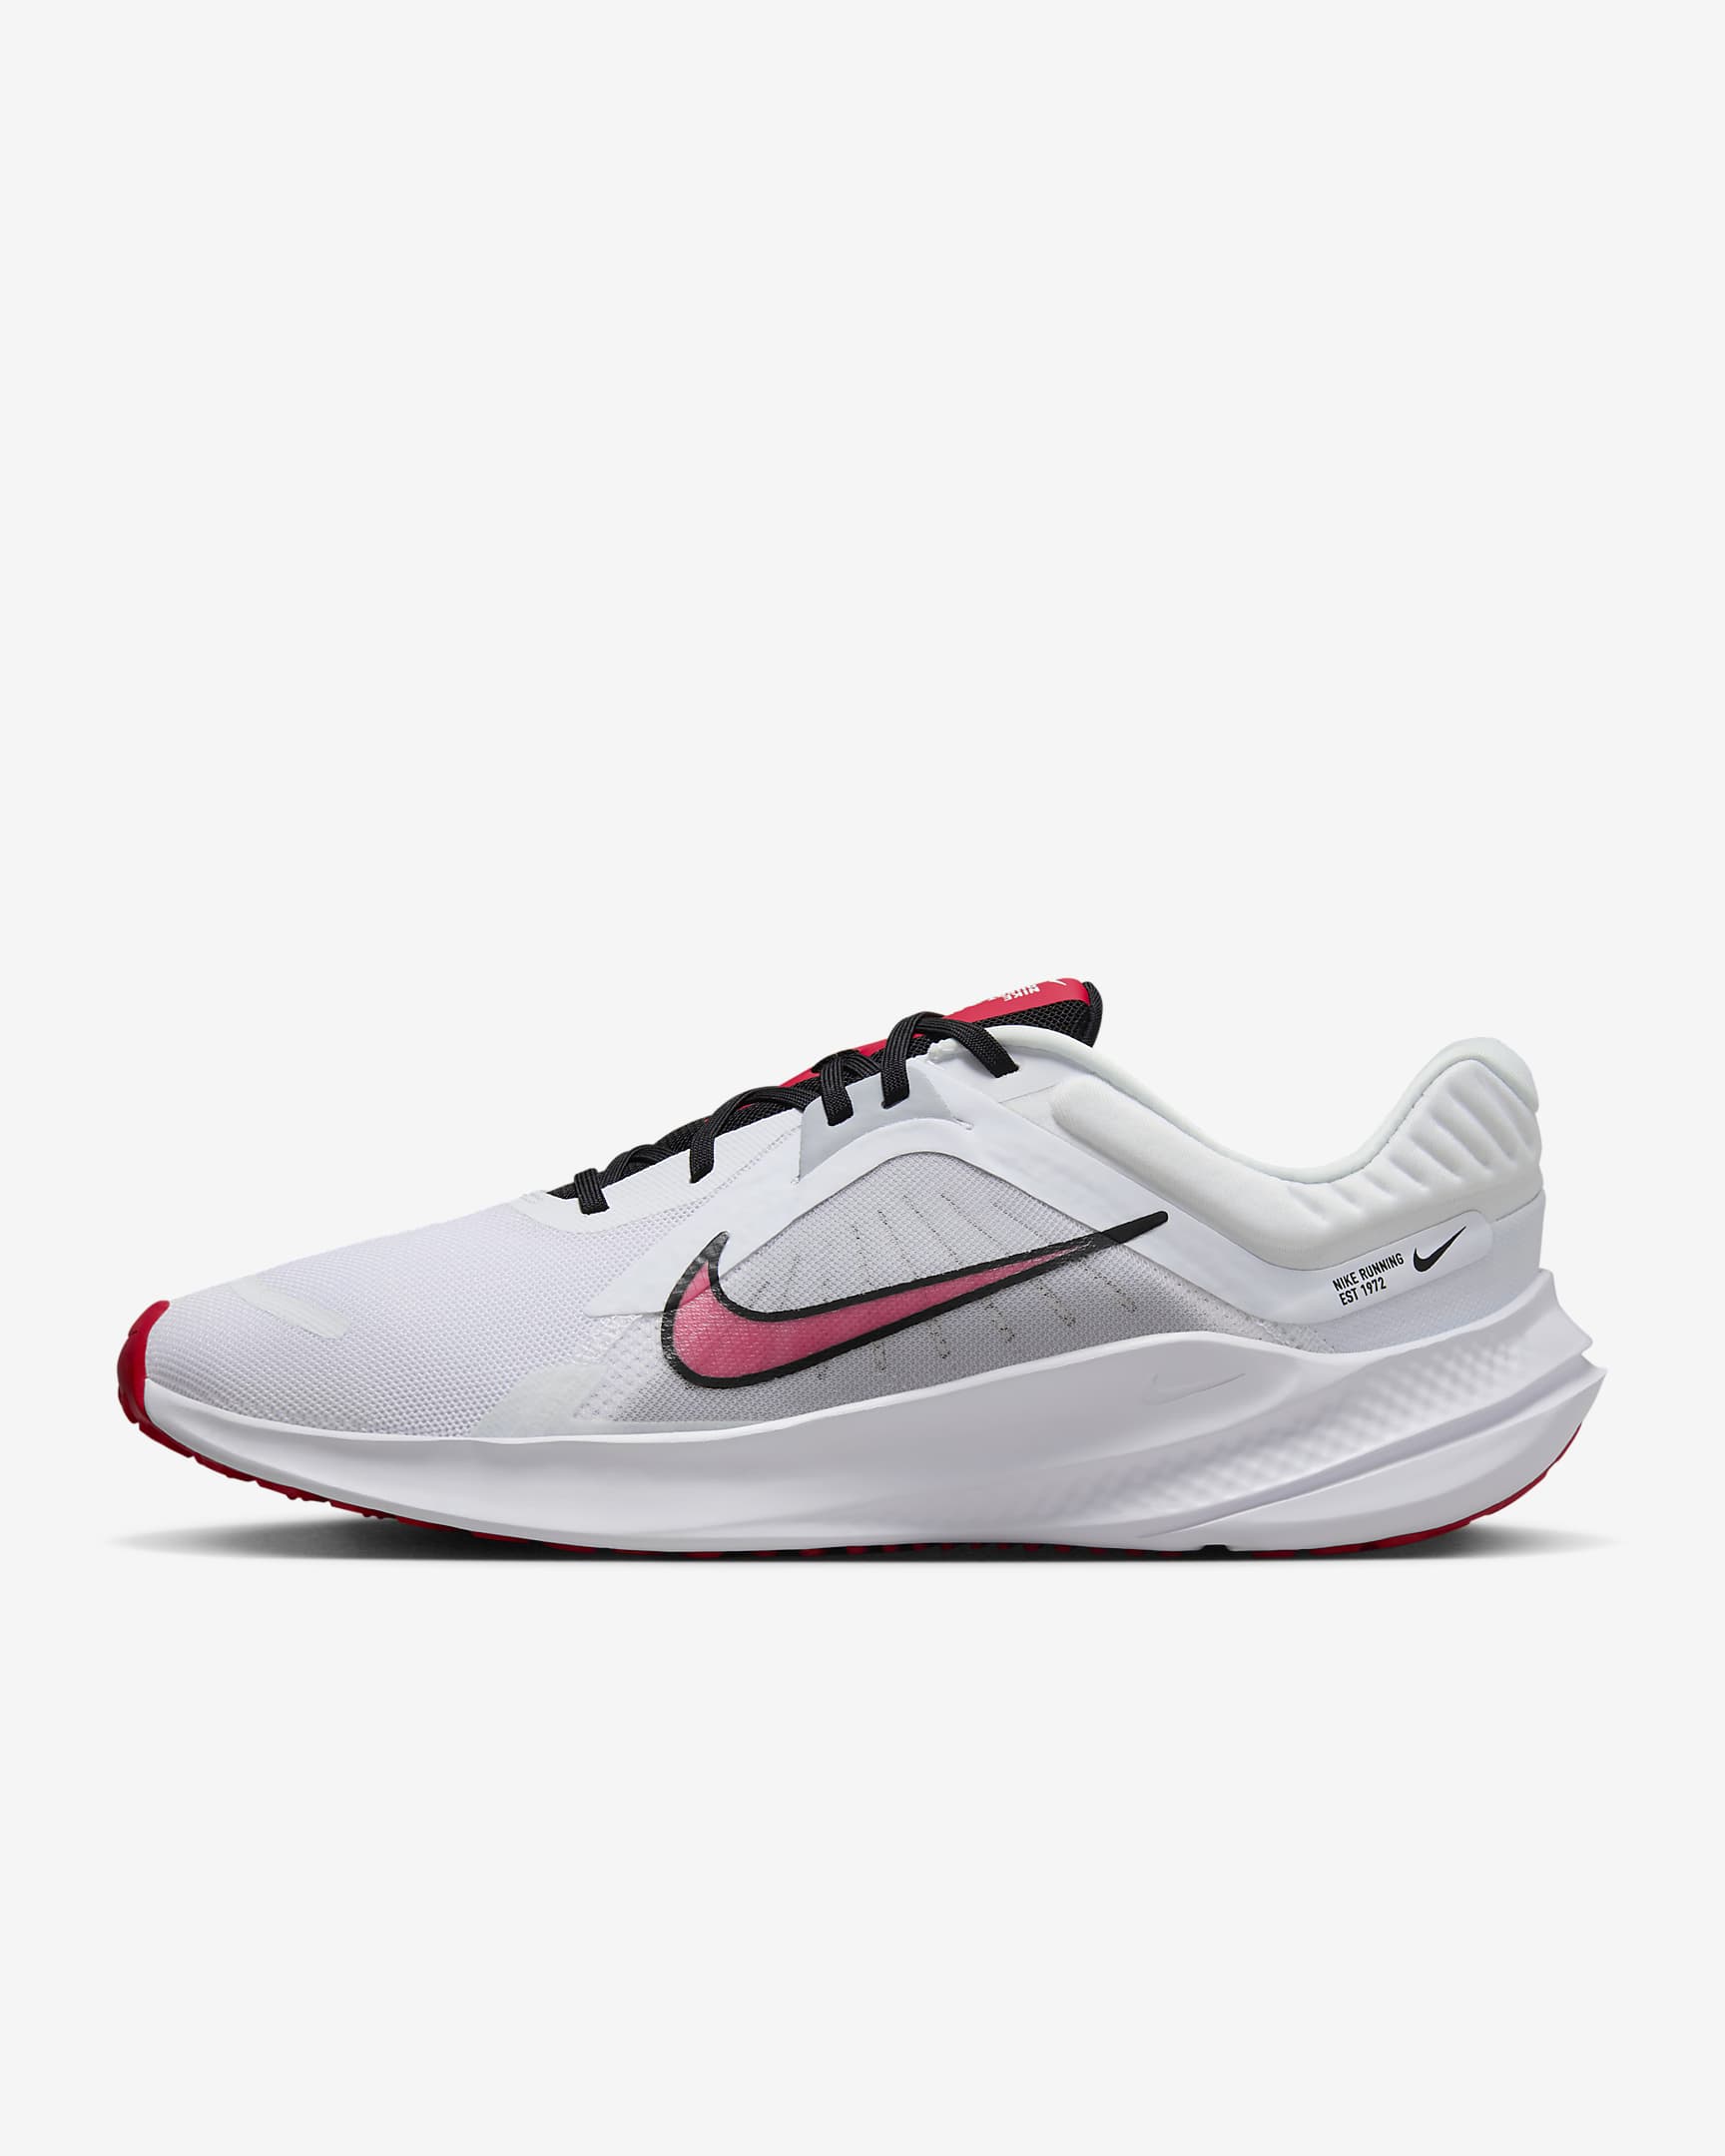 Nike Quest 5 Men's Road Running Shoes - White/Light Smoke Grey/Black/Fire Red